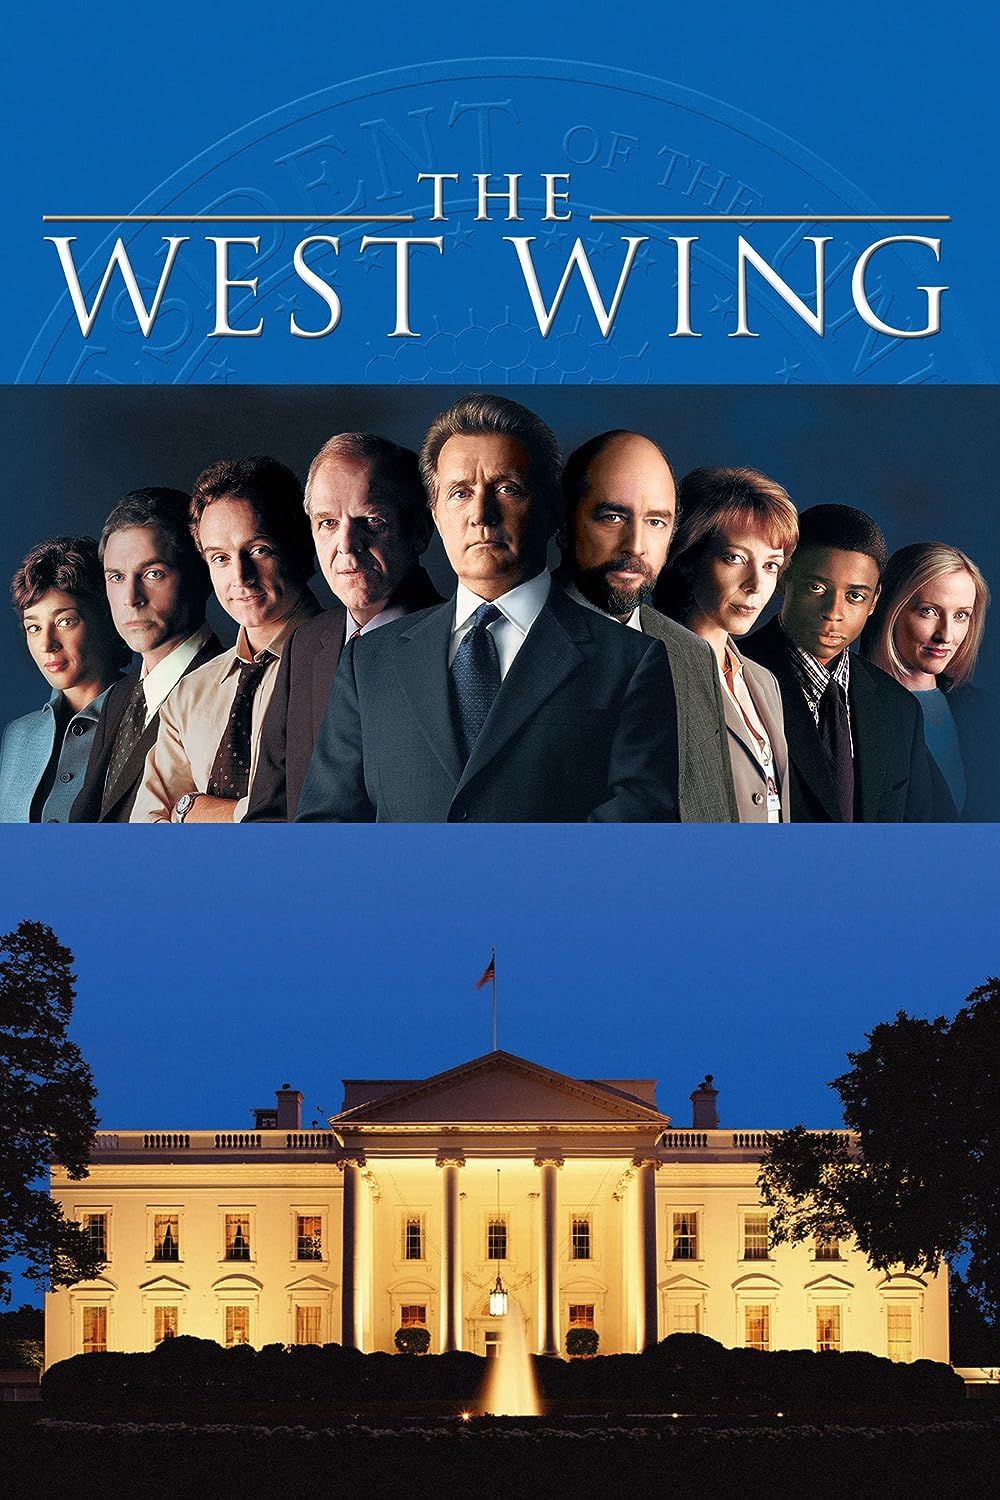 The West Wing TV show poster